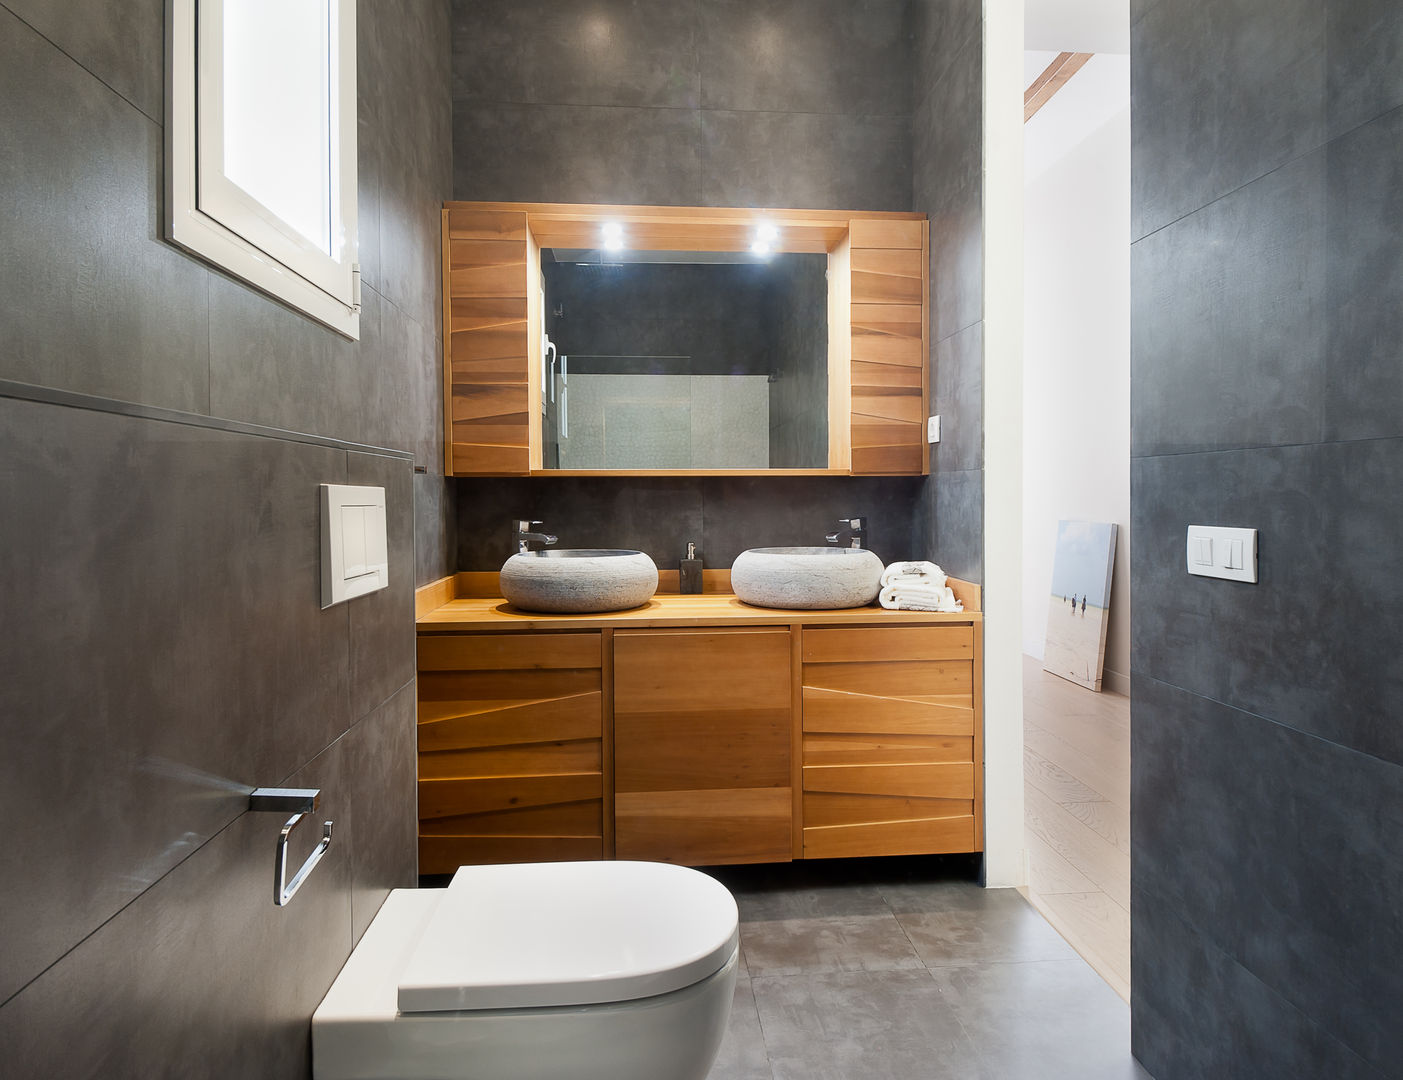 Home Staging para una Venta Inmobiliaria Exitosa, Markham Stagers Markham Stagers Modern bathroom Wood